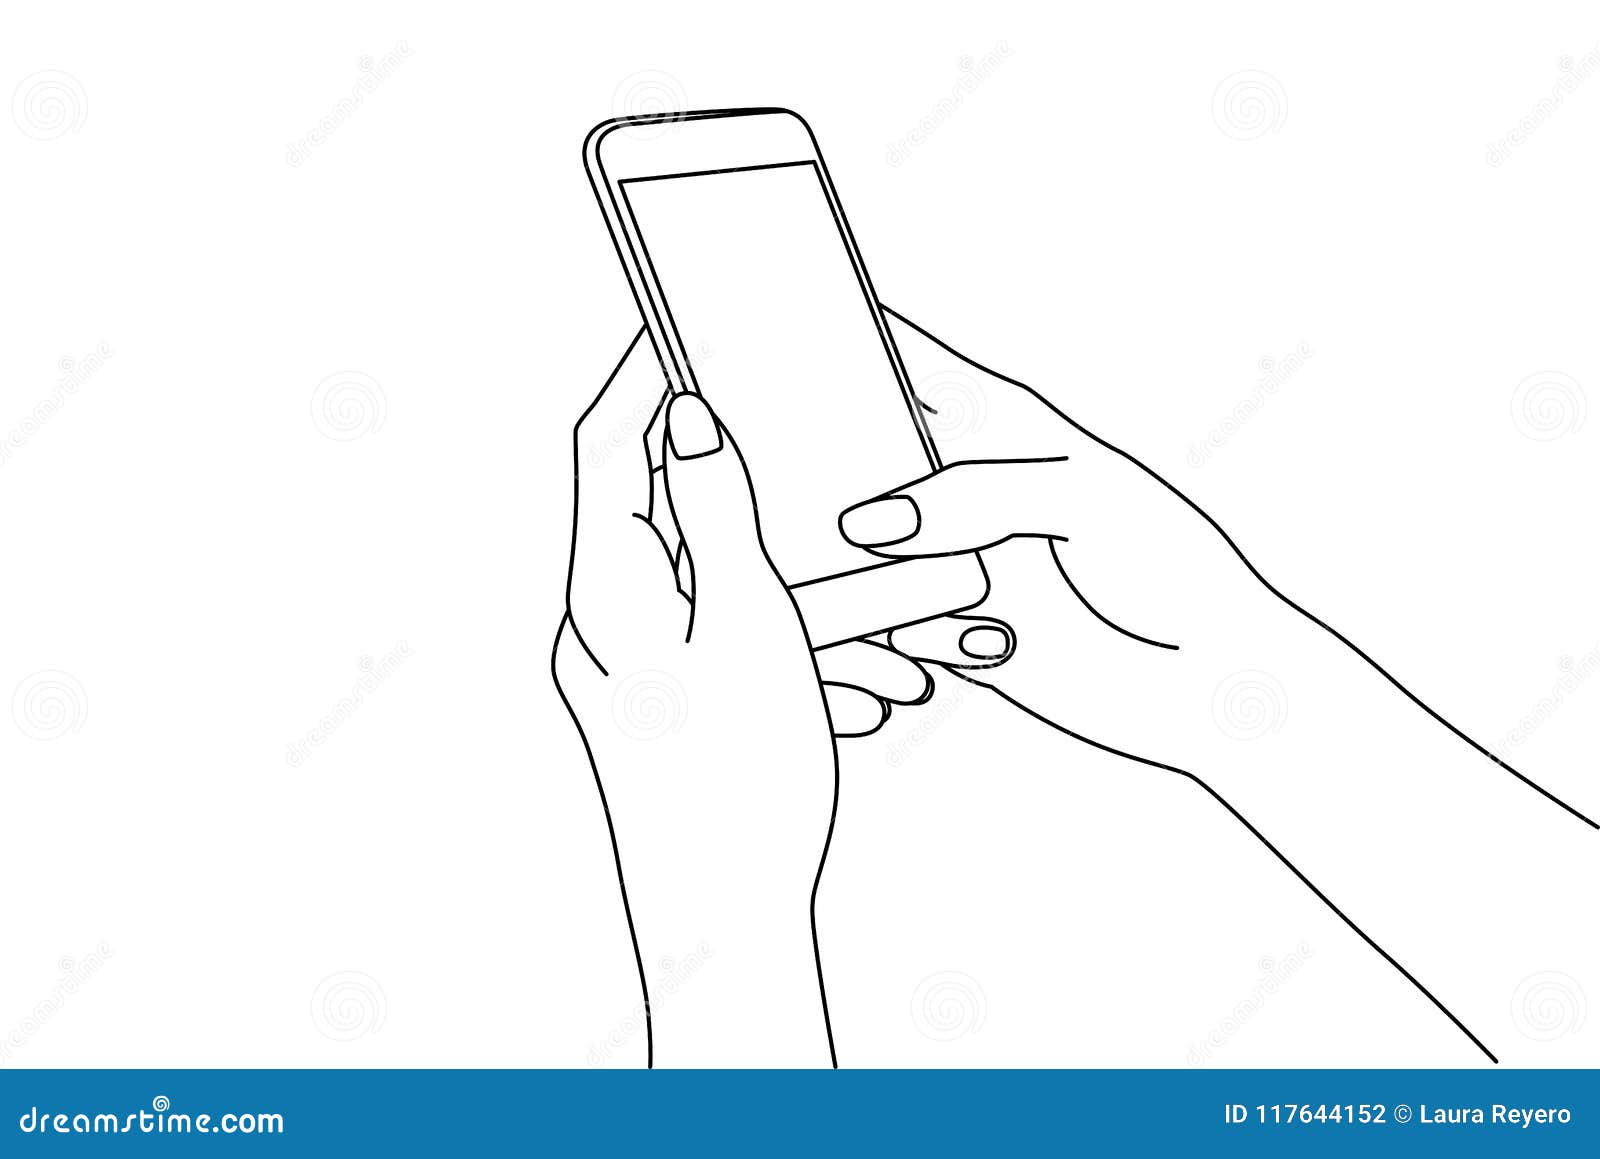 hands texting in a smartphone